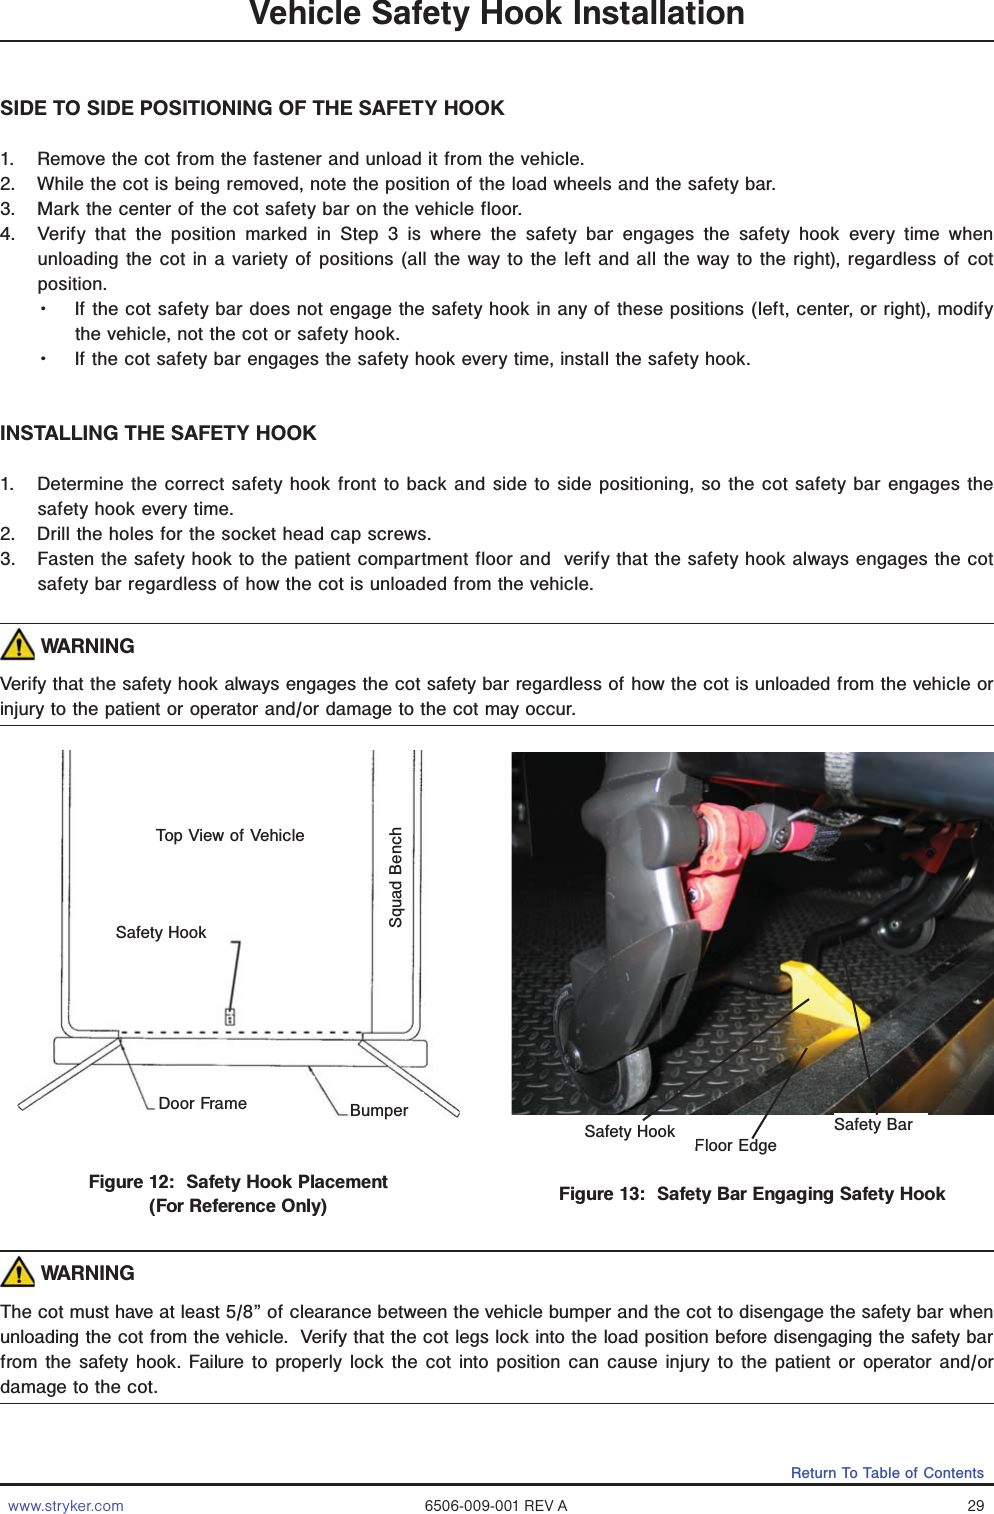 www.stryker.com 6506-009-001 REV A 29Return To Table of ContentsVehicle Safety Hook InstallationSIDE TO SIDE POSITIONING OF THE SAFETY HOOK1.  Remove the cot from the fastener and unload it from the vehicle.2.  While the cot is being removed, note the position of the load wheels and the safety bar.3.  Mark the center of the cot safety bar on the vehicle floor.4.  Verify that the position marked in Step 3 is where the safety bar engages the safety hook every time when unloading the cot in a variety of positions (all the way to the left and all the way to the right), regardless of cot position.Ǩɣ If the cot safety bar does not engage the safety hook in any of these positions (left, center, or right), modify the vehicle, not the cot or safety hook.Ǩɣ If the cot safety bar engages the safety hook every time, install the safety hook.INSTALLING THE SAFETY HOOK1.  Determine the correct safety hook front to back and side to side positioning, so the cot safety bar engages the safety hook every time.  2.  Drill the holes for the socket head cap screws.3.  Fasten the safety hook to the patient compartment floor and  verify that the safety hook always engages the cot safety bar regardless of how the cot is unloaded from the vehicle.  WARNING Verify that the safety hook always engages the cot safety bar regardless of how the cot is unloaded from the vehicle or injury to the patient or operator and/or damage to the cot may occur. WARNING The cot must have at least 5/8” of clearance between the vehicle bumper and the cot to disengage the safety bar when unloading the cot from the vehicle.  Verify that the cot legs lock into the load position before disengaging the safety bar from the safety hook. Failure to properly lock the cot into position can cause injury to the patient or operator and/or damage to the cot.Figure 12:  Safety Hook Placement(For Reference Only) Figure 13:  Safety Bar Engaging Safety HookTop View of VehicleBumperDoor FrameSafety HookSquad BenchFloor EdgeSafety Hook Safety Bar